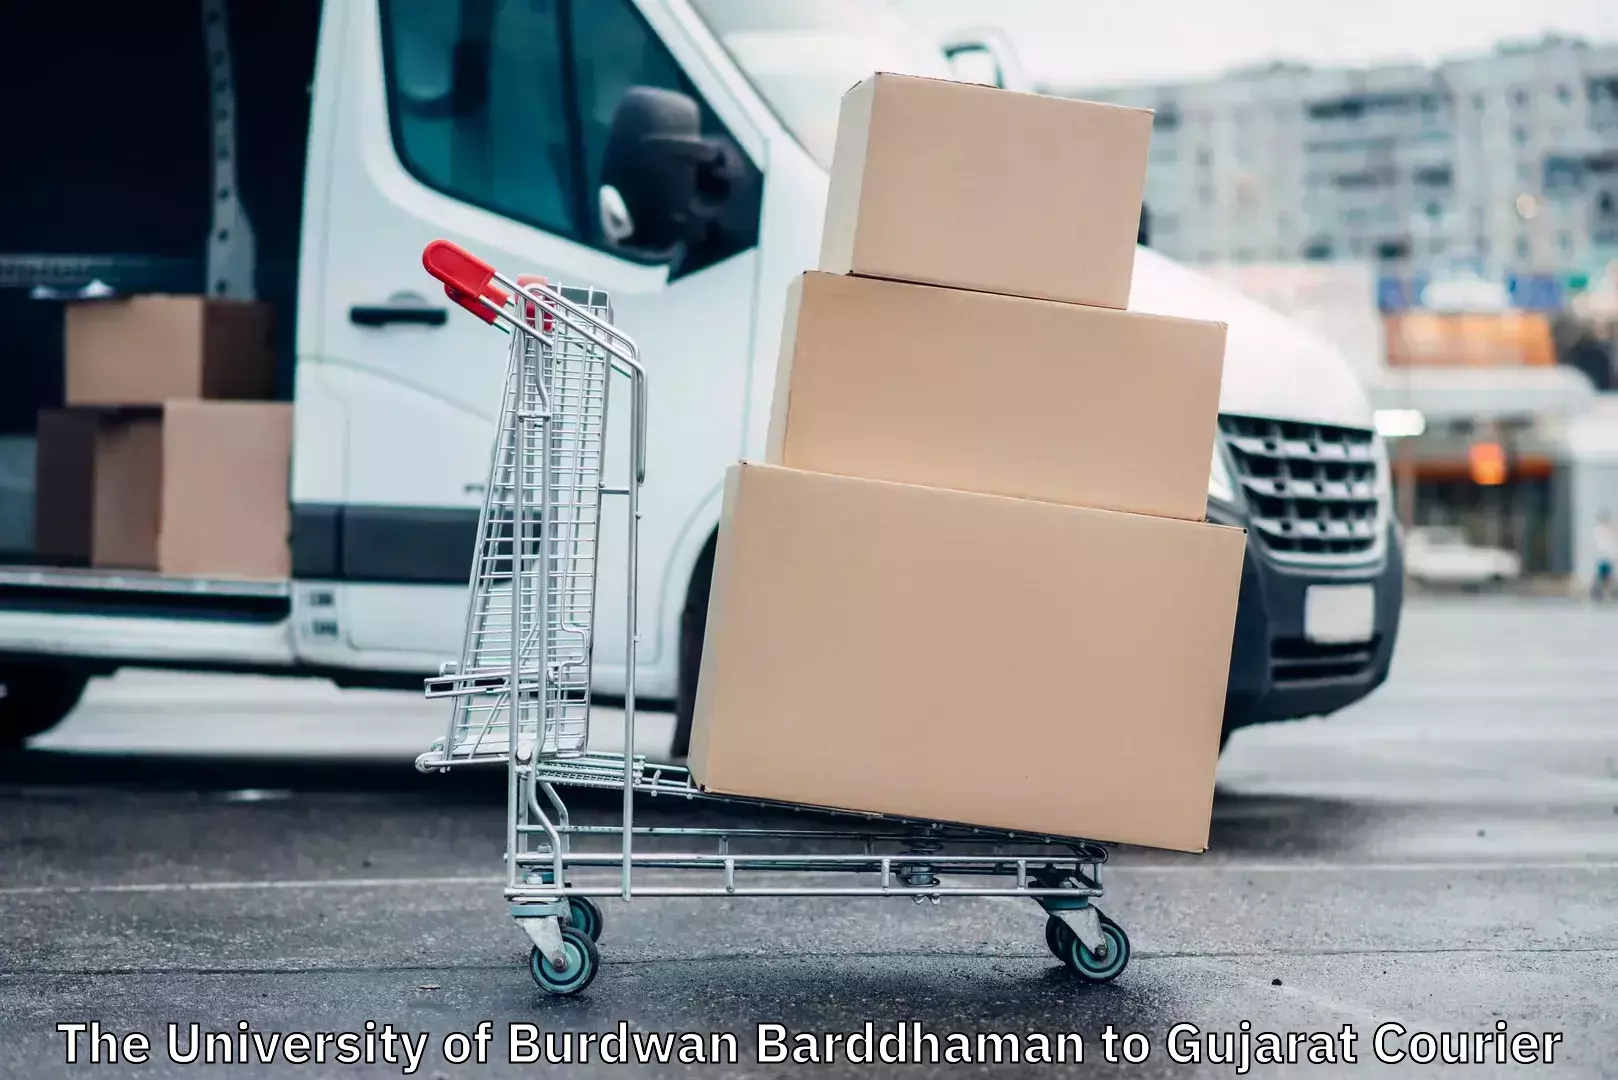 Punctual parcel services The University of Burdwan Barddhaman to Gujarat